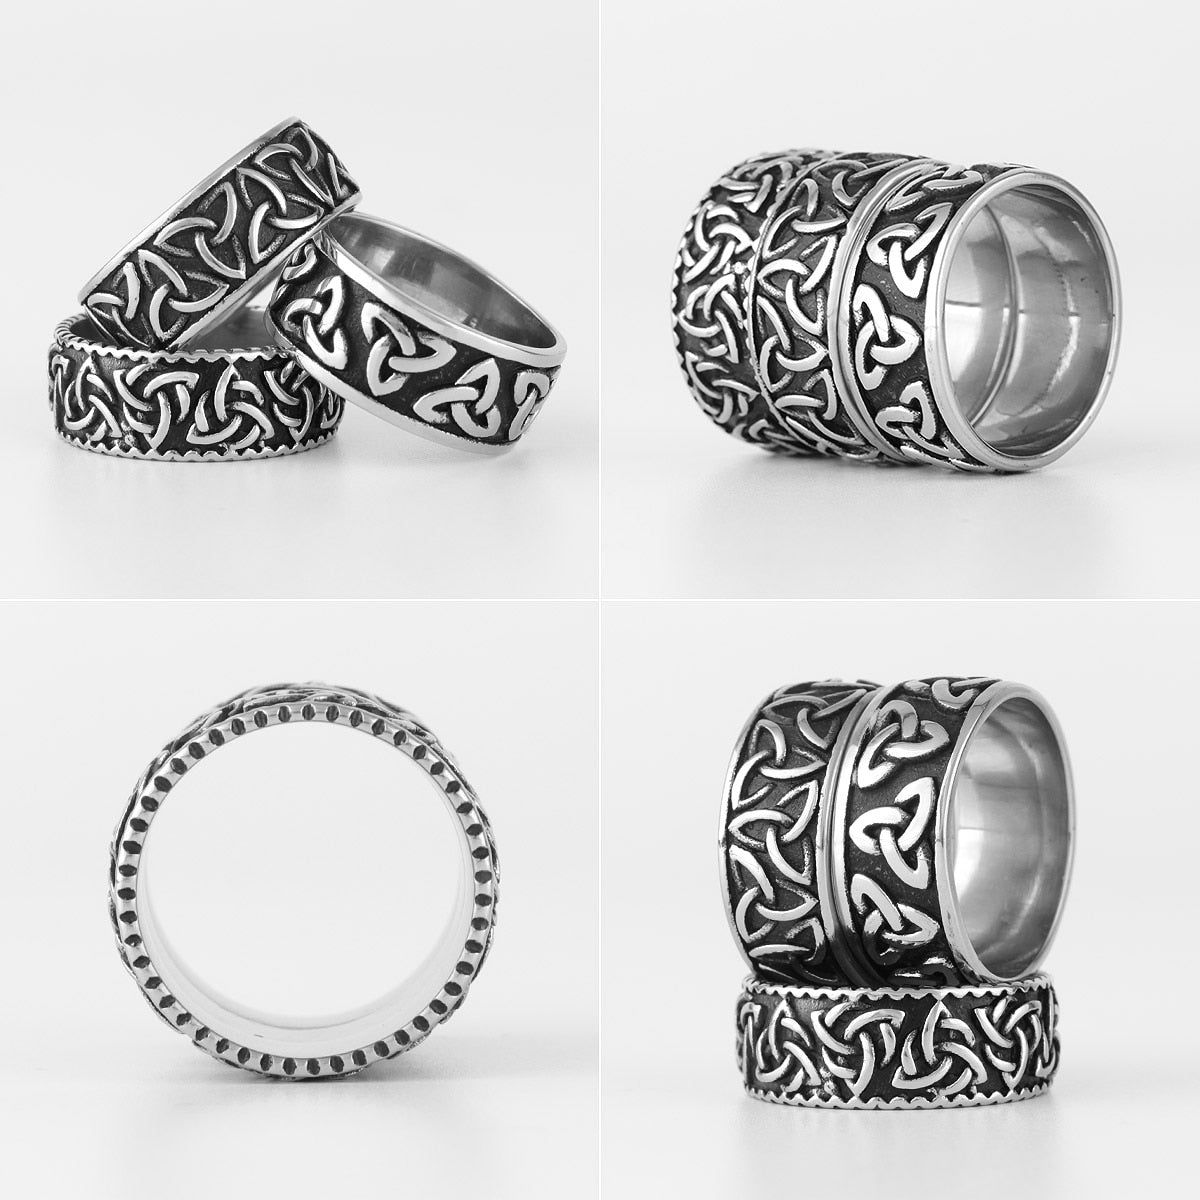 Celtic Knot Weave Viking Symbols Stainless Steel Mens Rings Punk Retro for Male Boyfriend Jewelry Creativity Gift Wholesale PAP SHOP 42